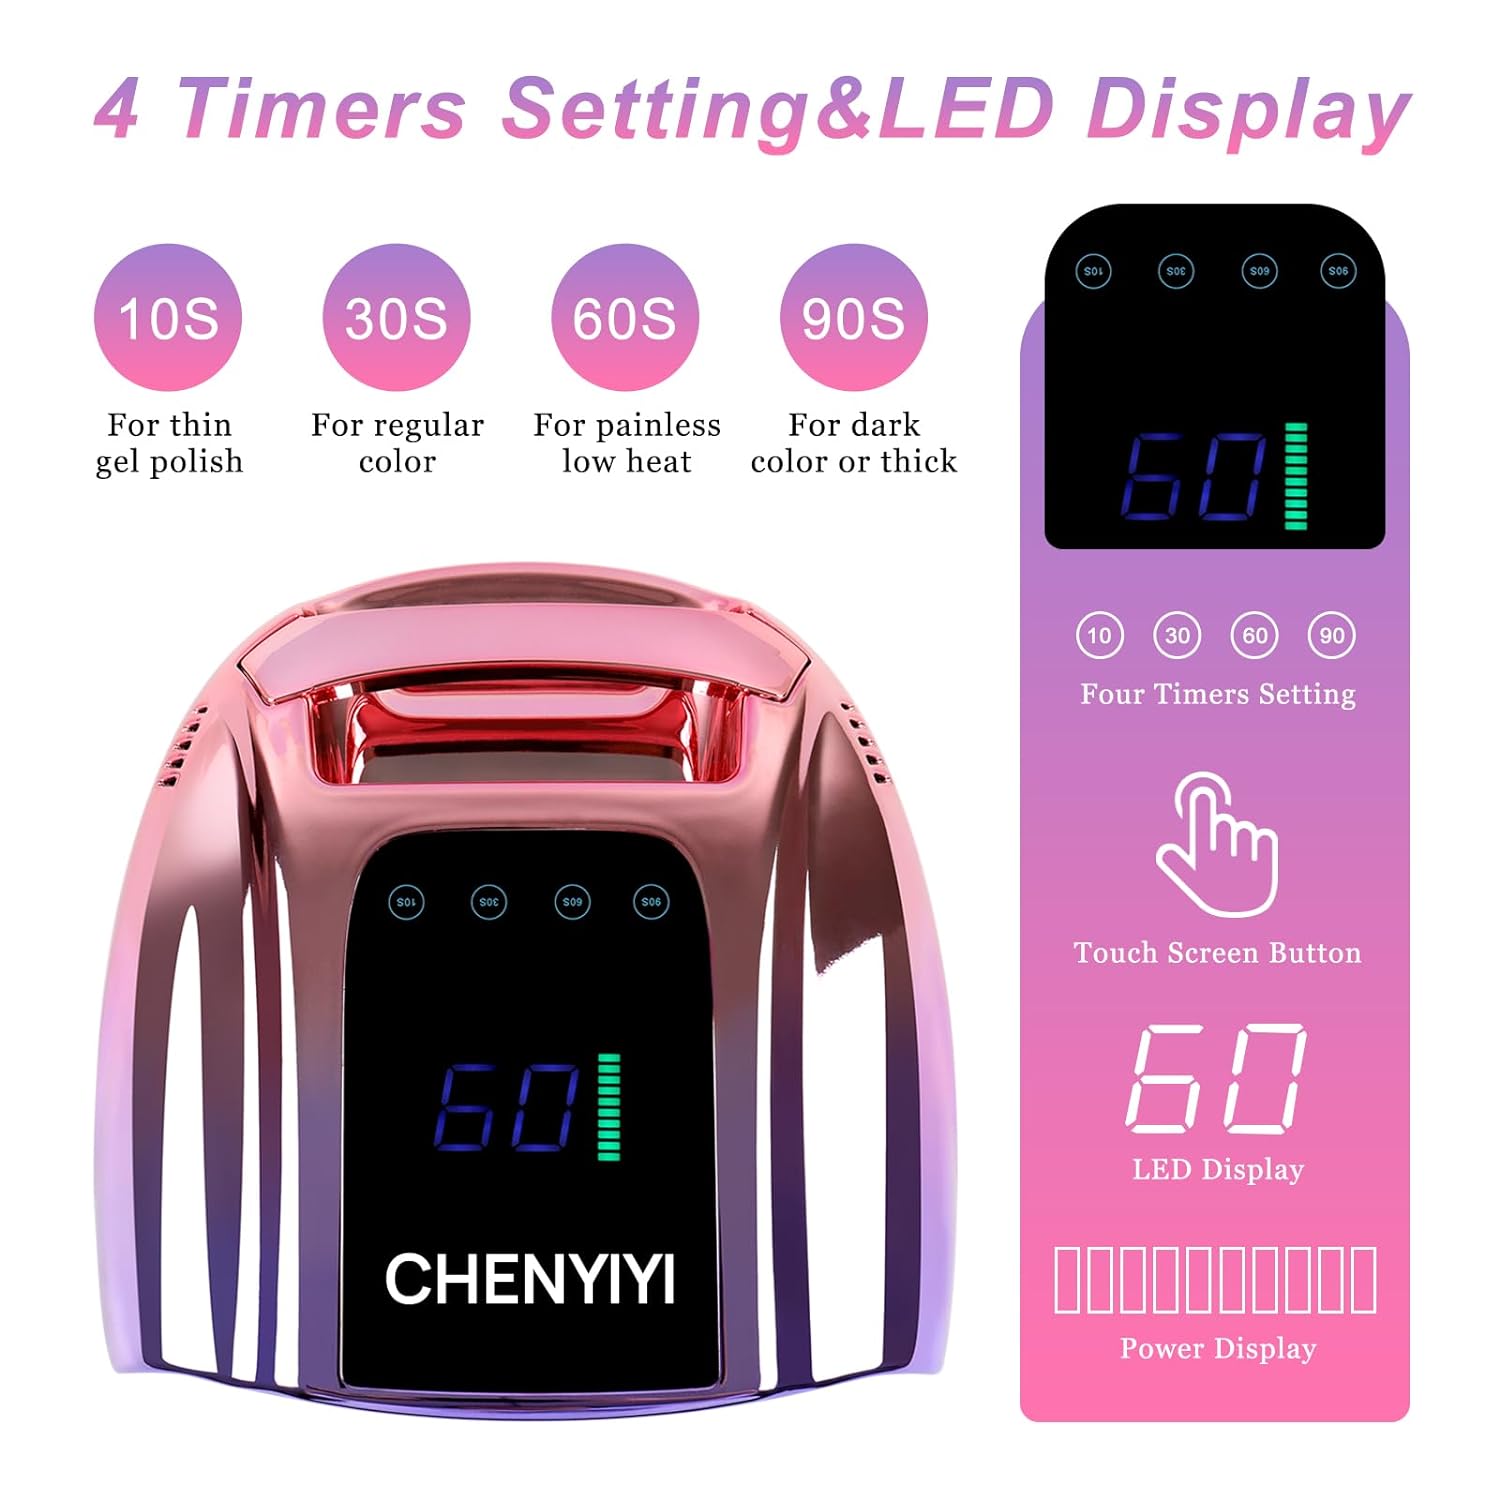 96W Rechargeable UV LED Nail Lamp, Portable Cordless UV Light for Nails with LCD Display Auto Sensor, Professional Nail Dryer for Salon (Purple)